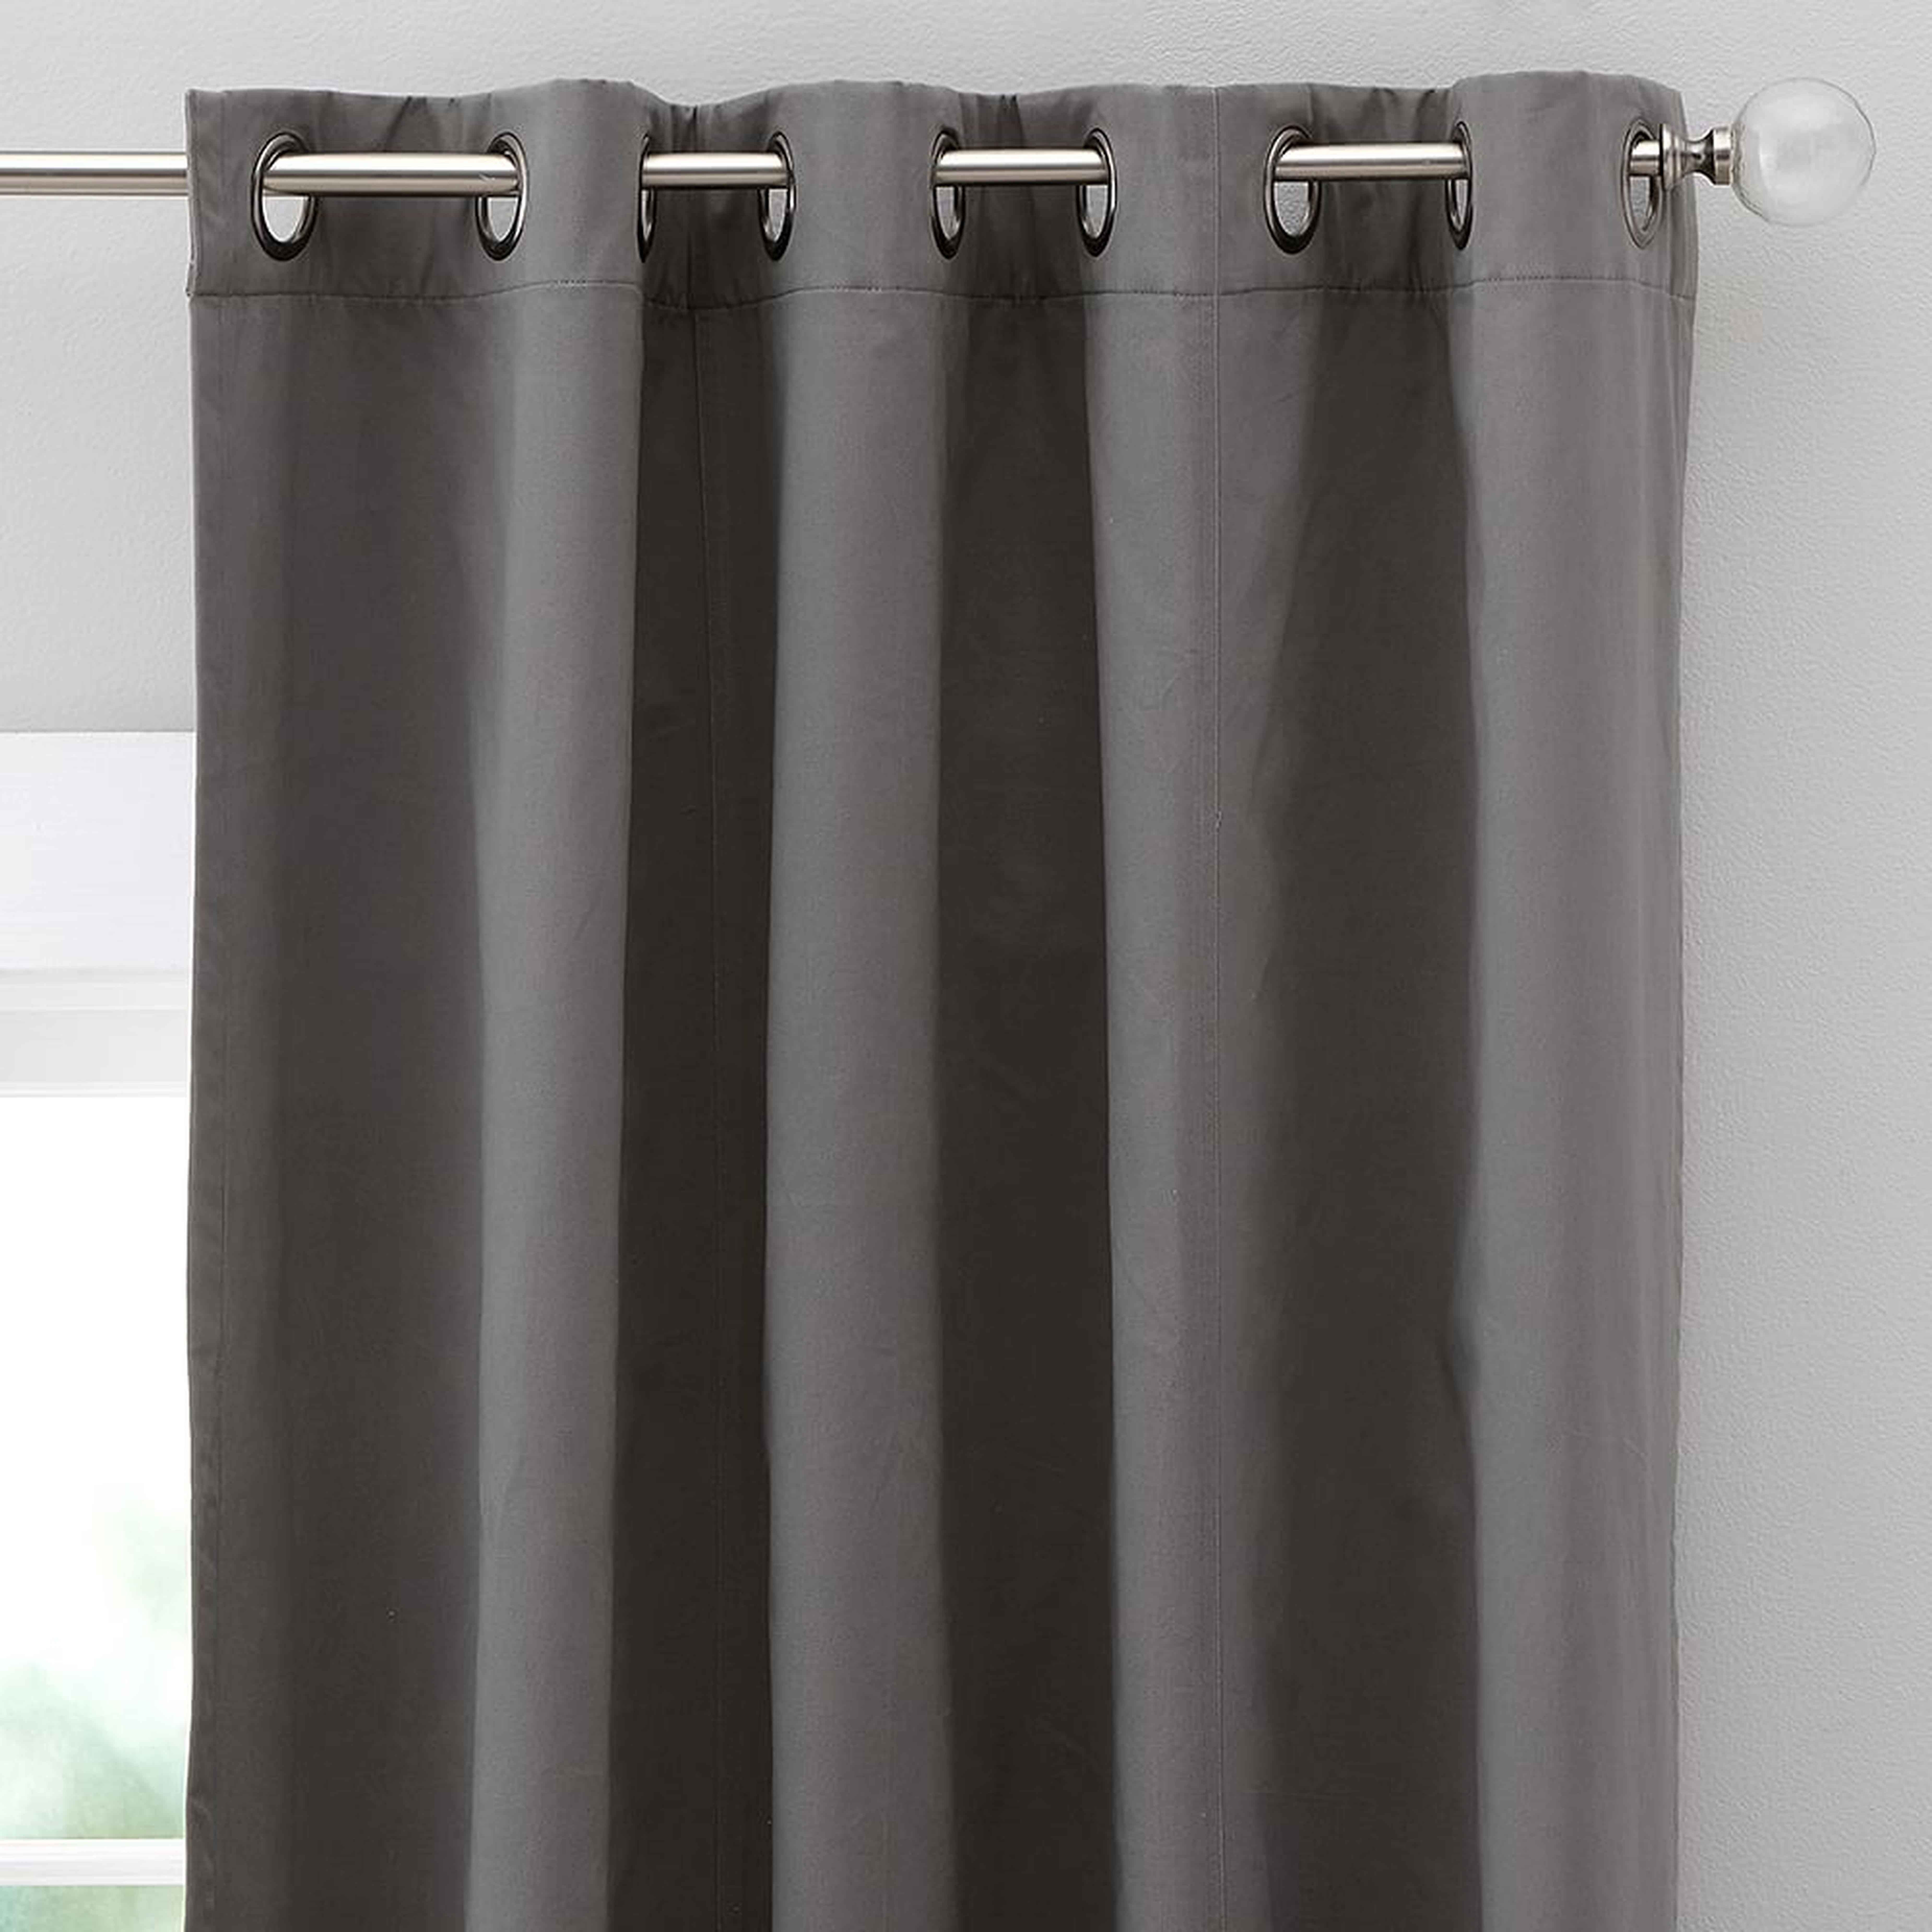 Classic Grommet Blackout Curtain - Set of 2, 84", Gray - Pottery Barn Teen